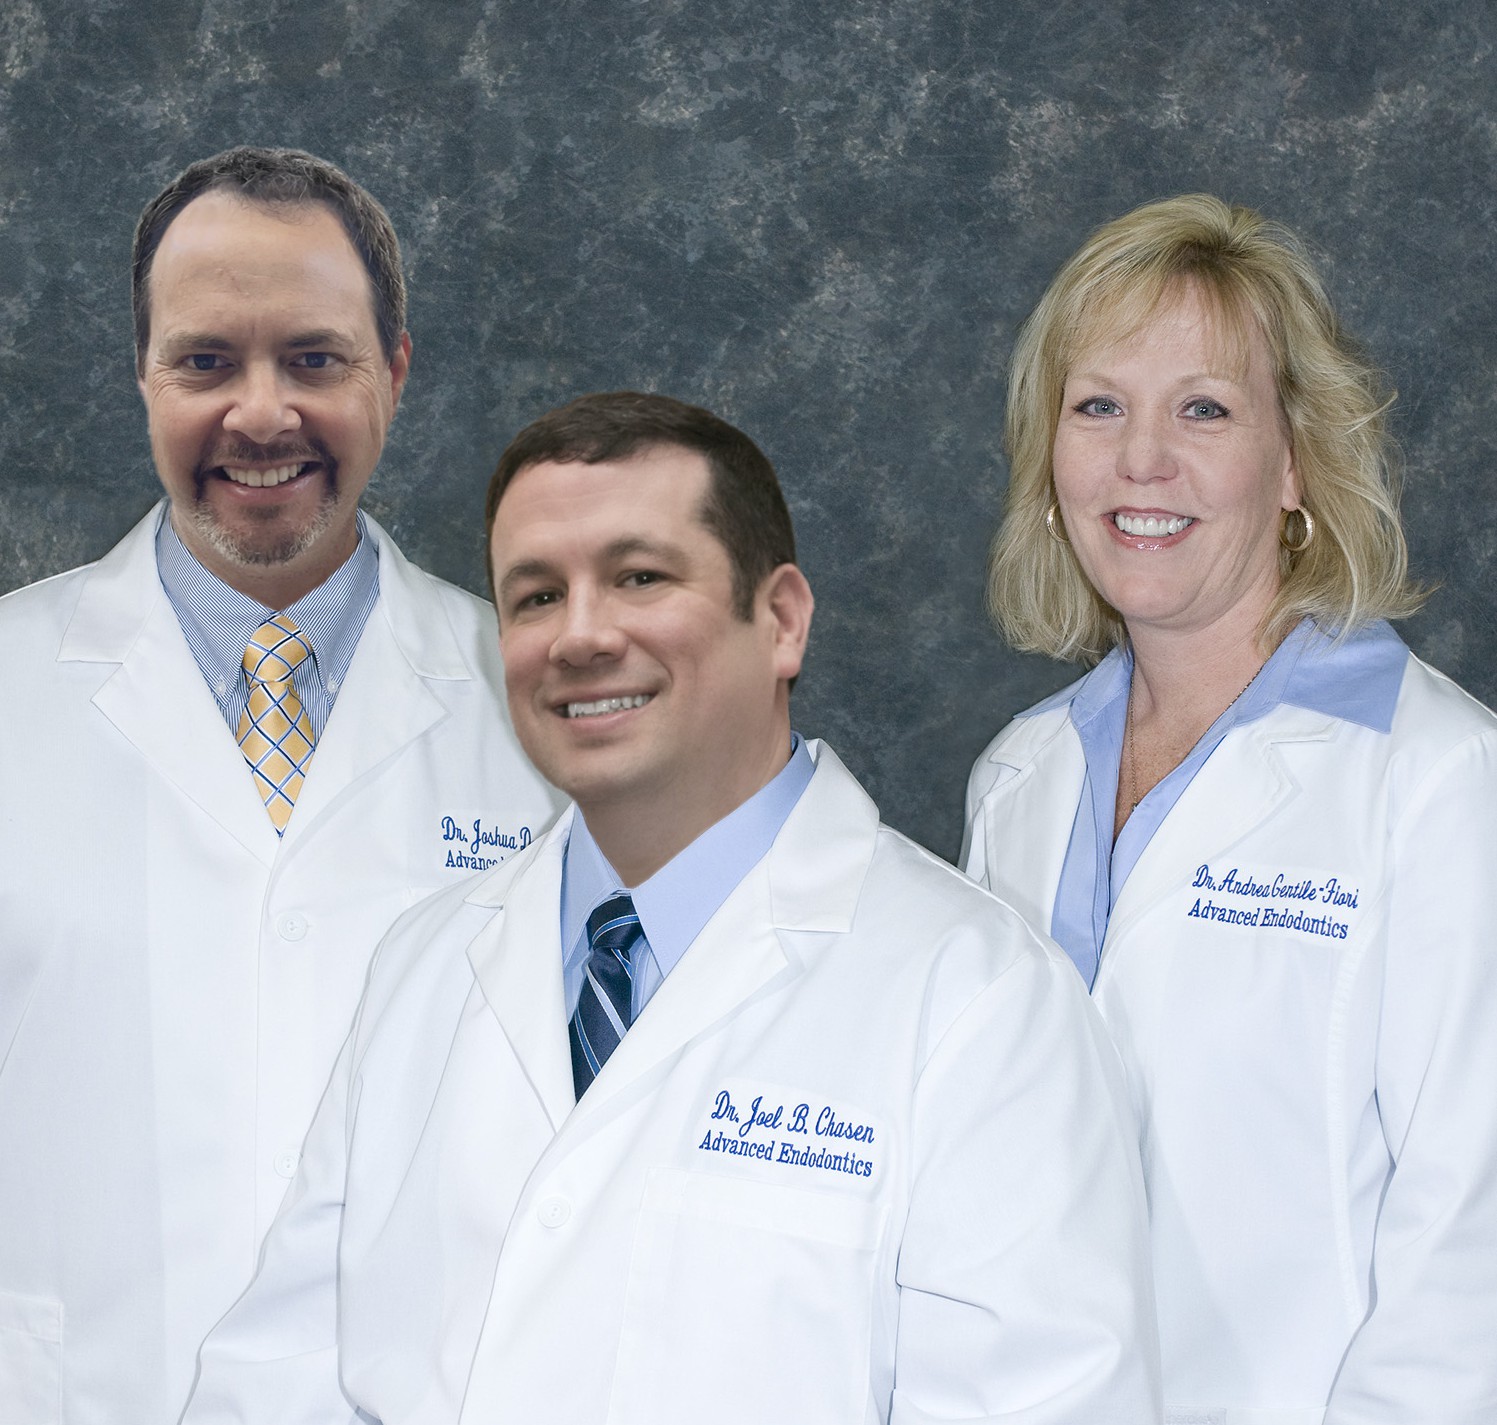 Root Canal Specialists - Joshua Dembsky, Joel Chasen, Andrea Gentile-Fiori